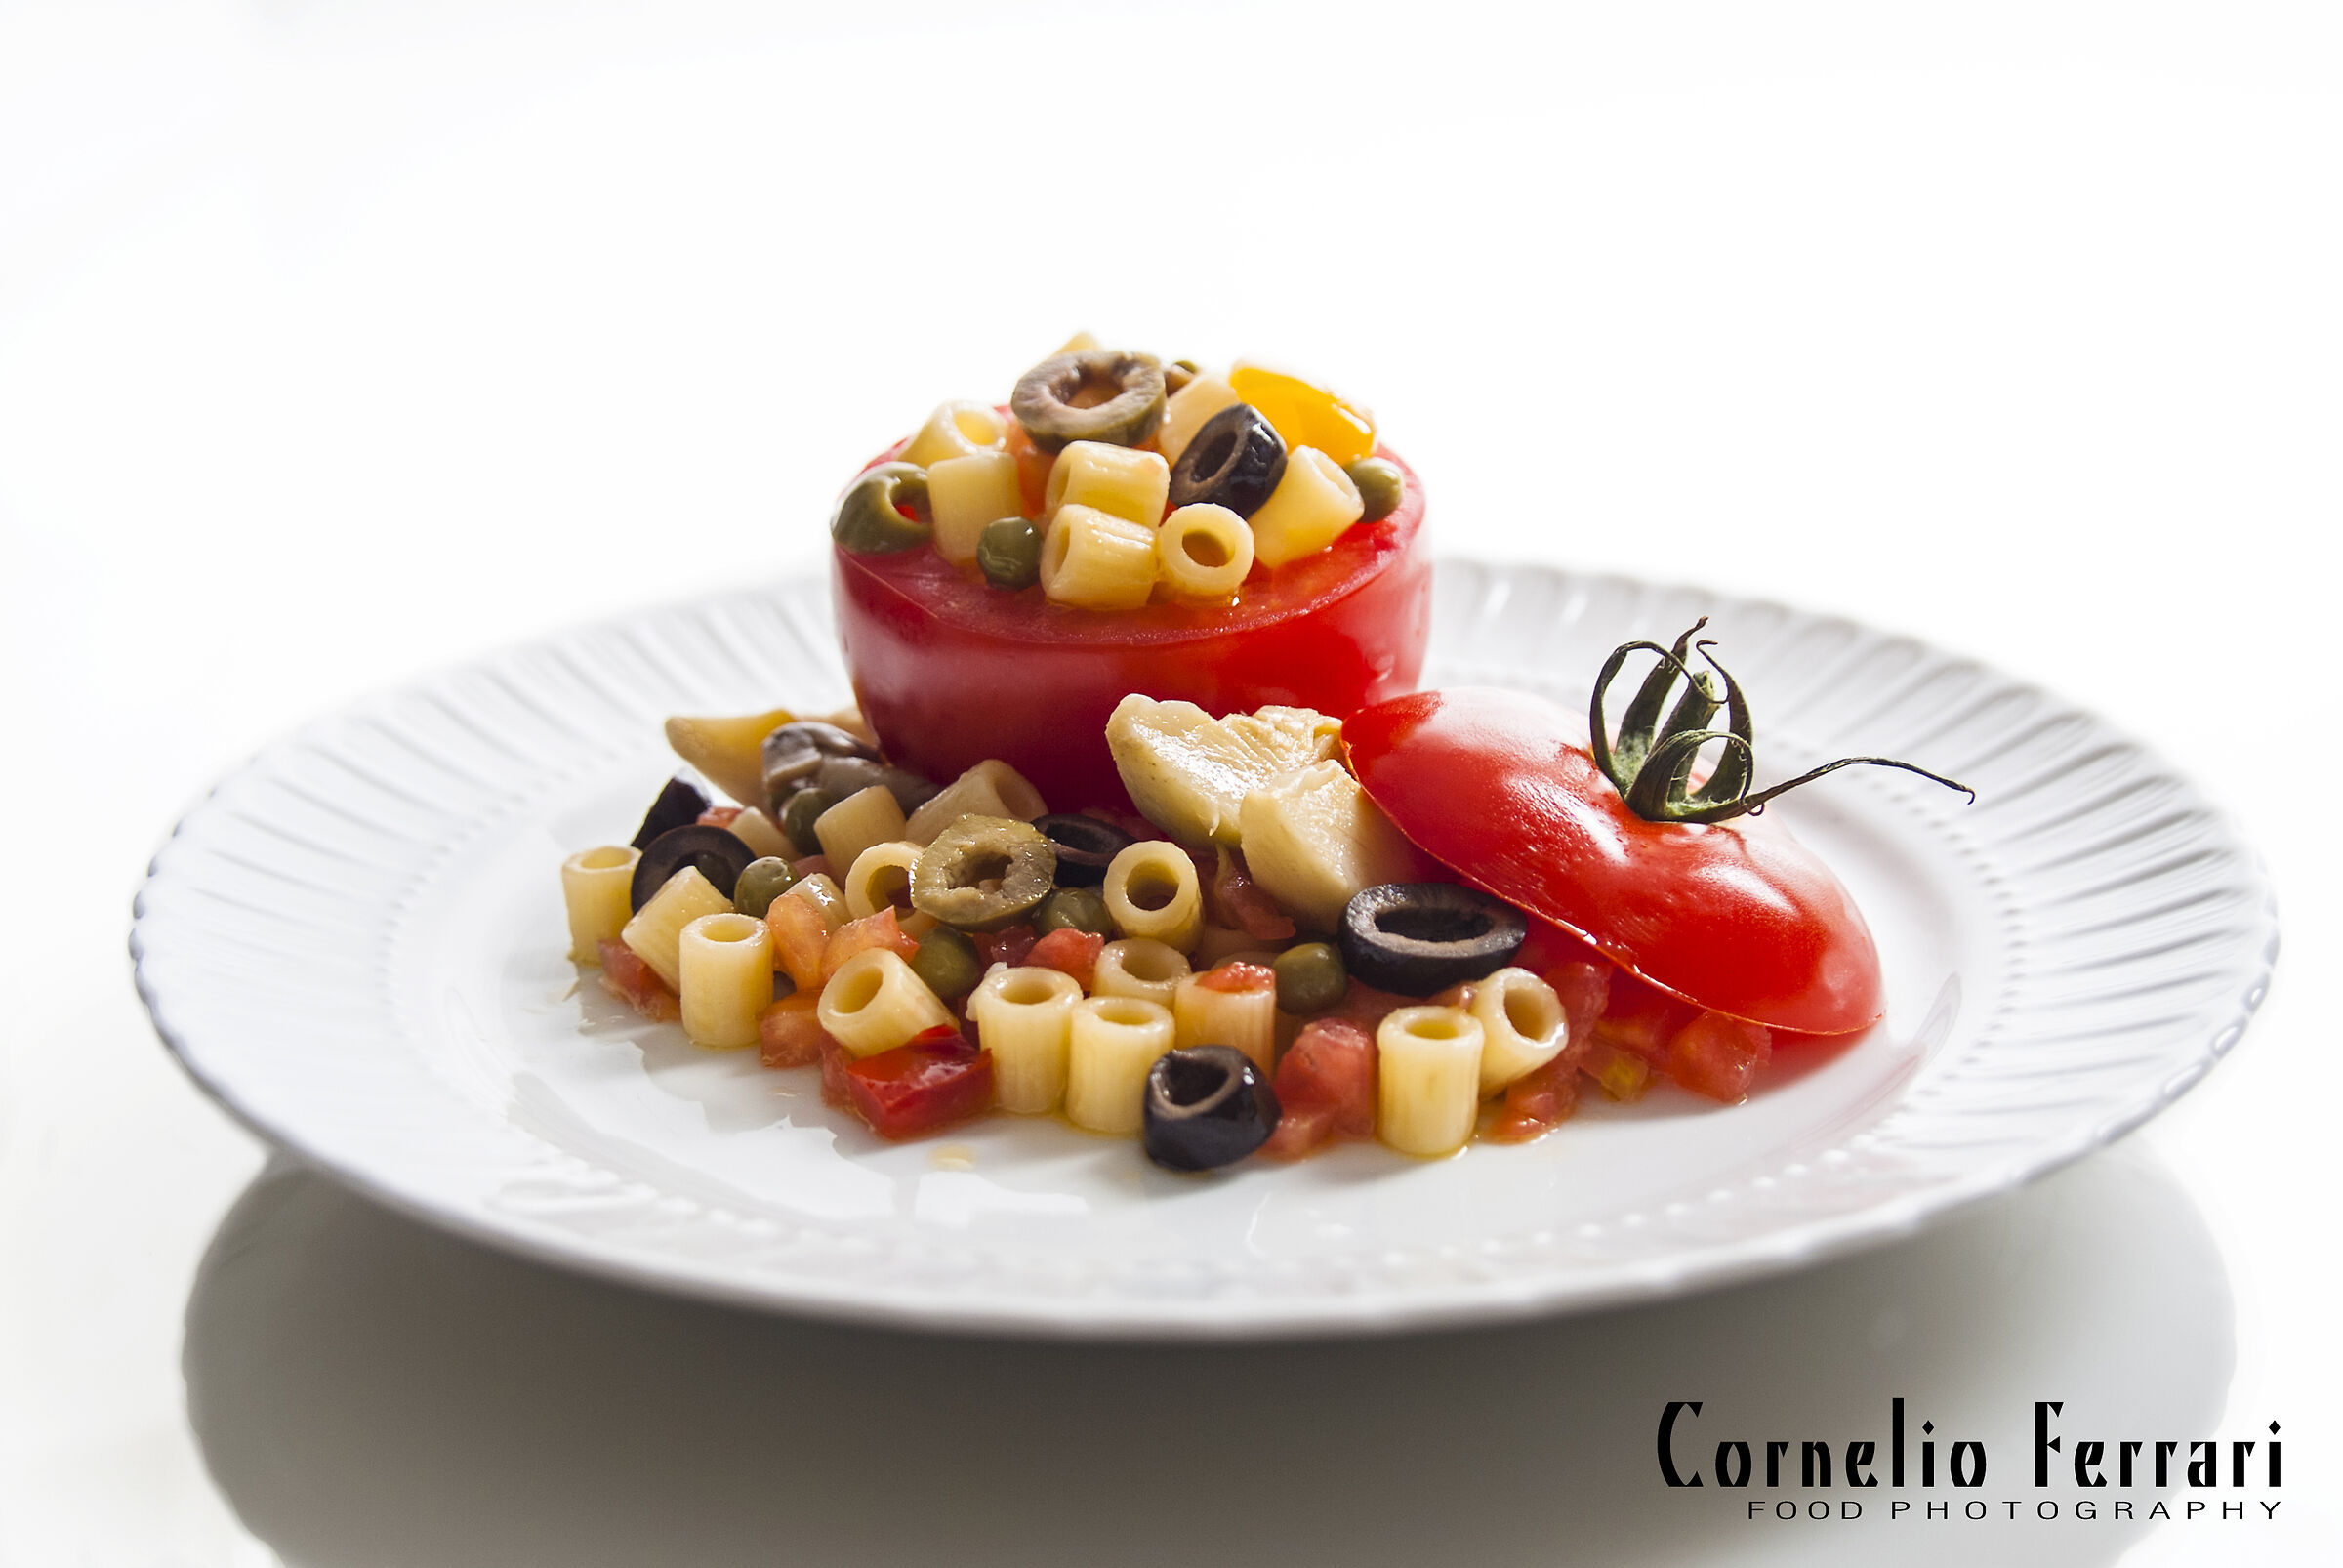 cold pasta with tomato and vegetables...